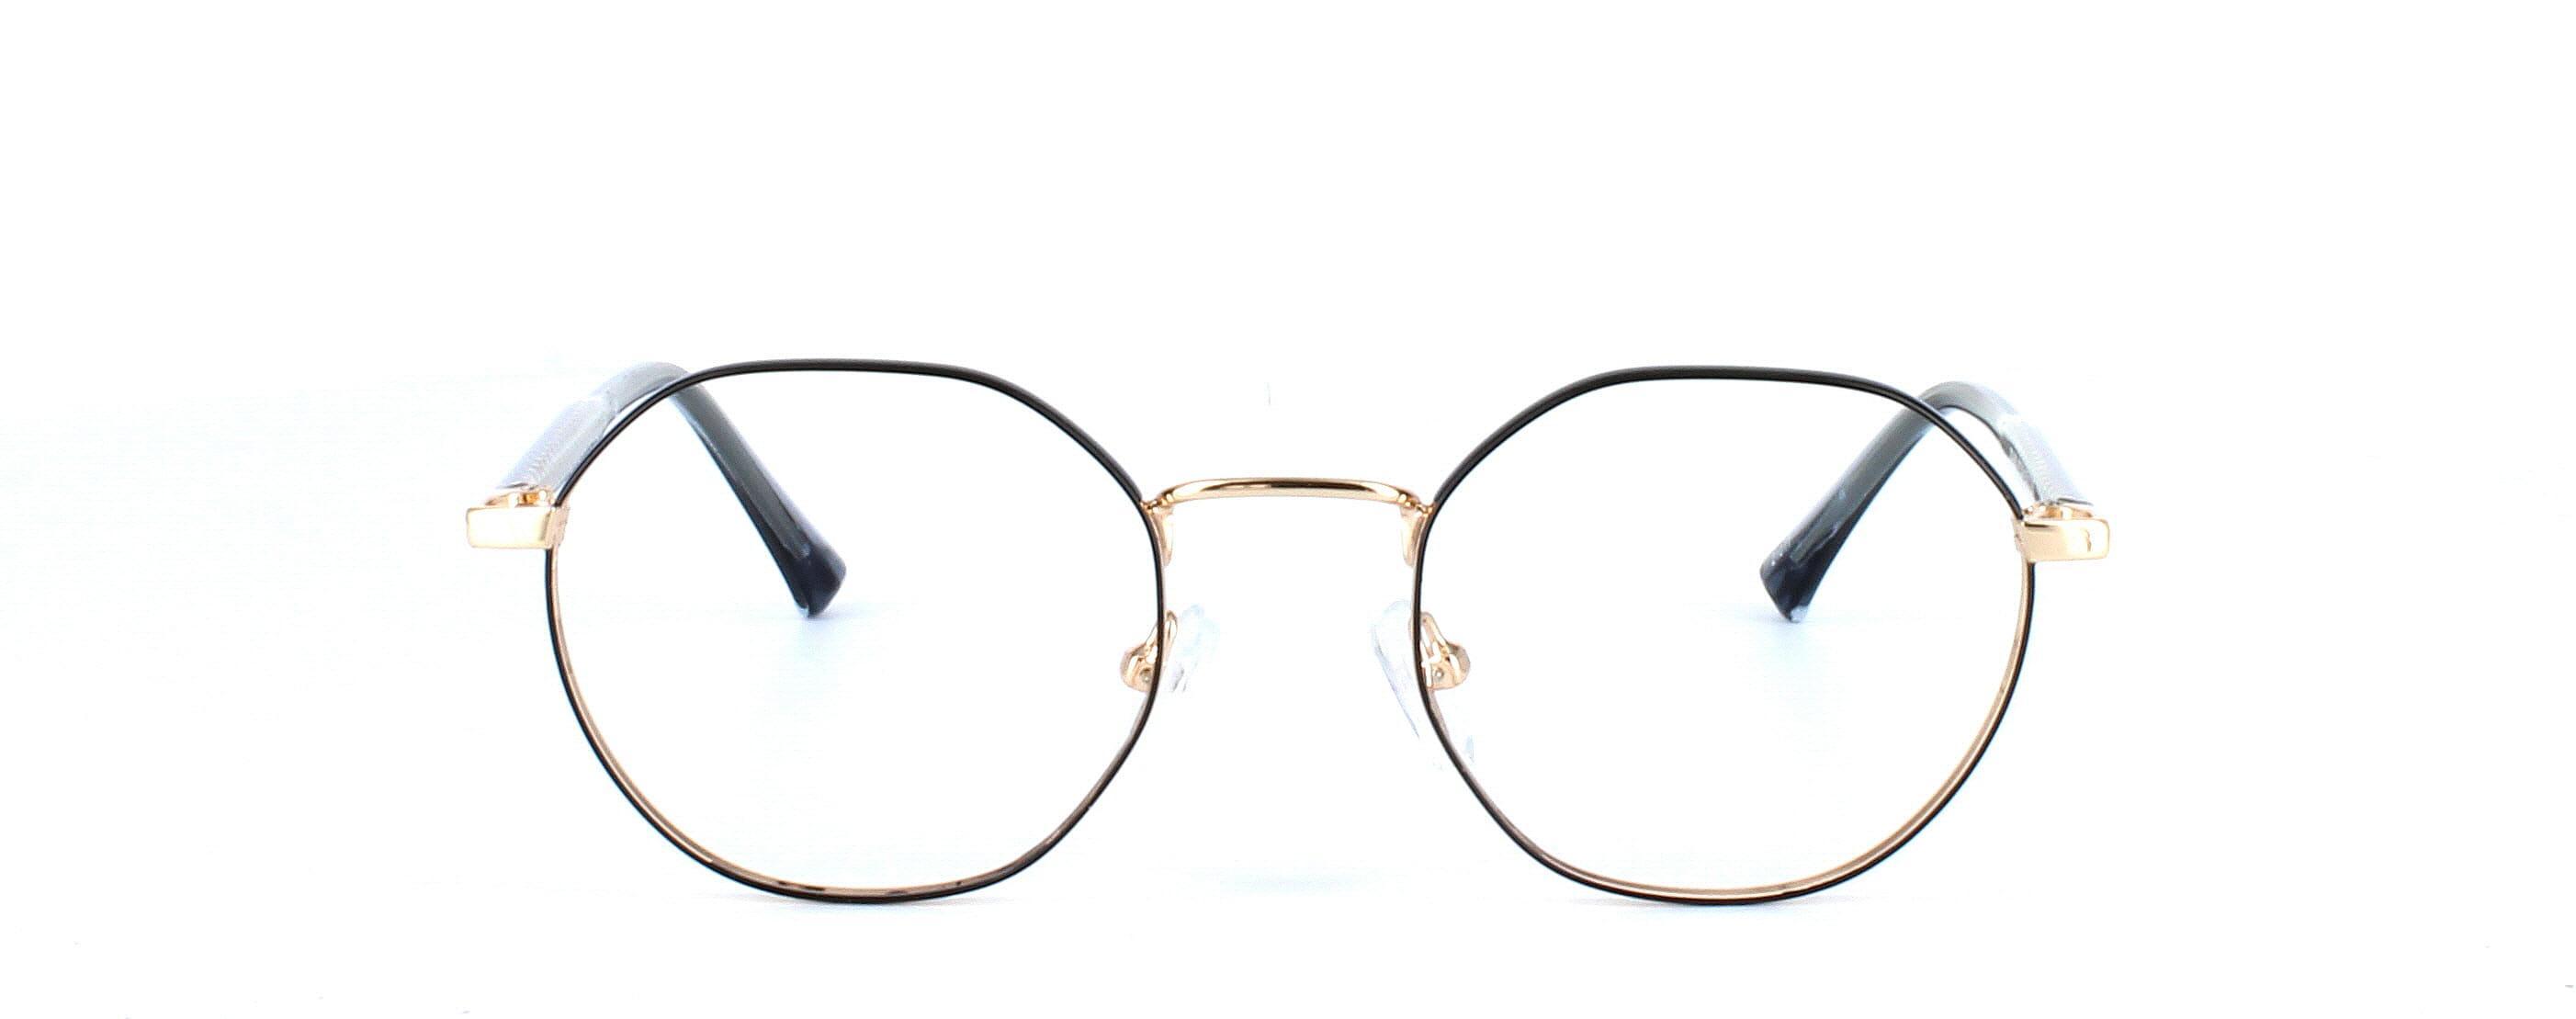 Cassiopeia - ladies hexagonal 2-tone metal glasses frame here in black & gold - image view 5